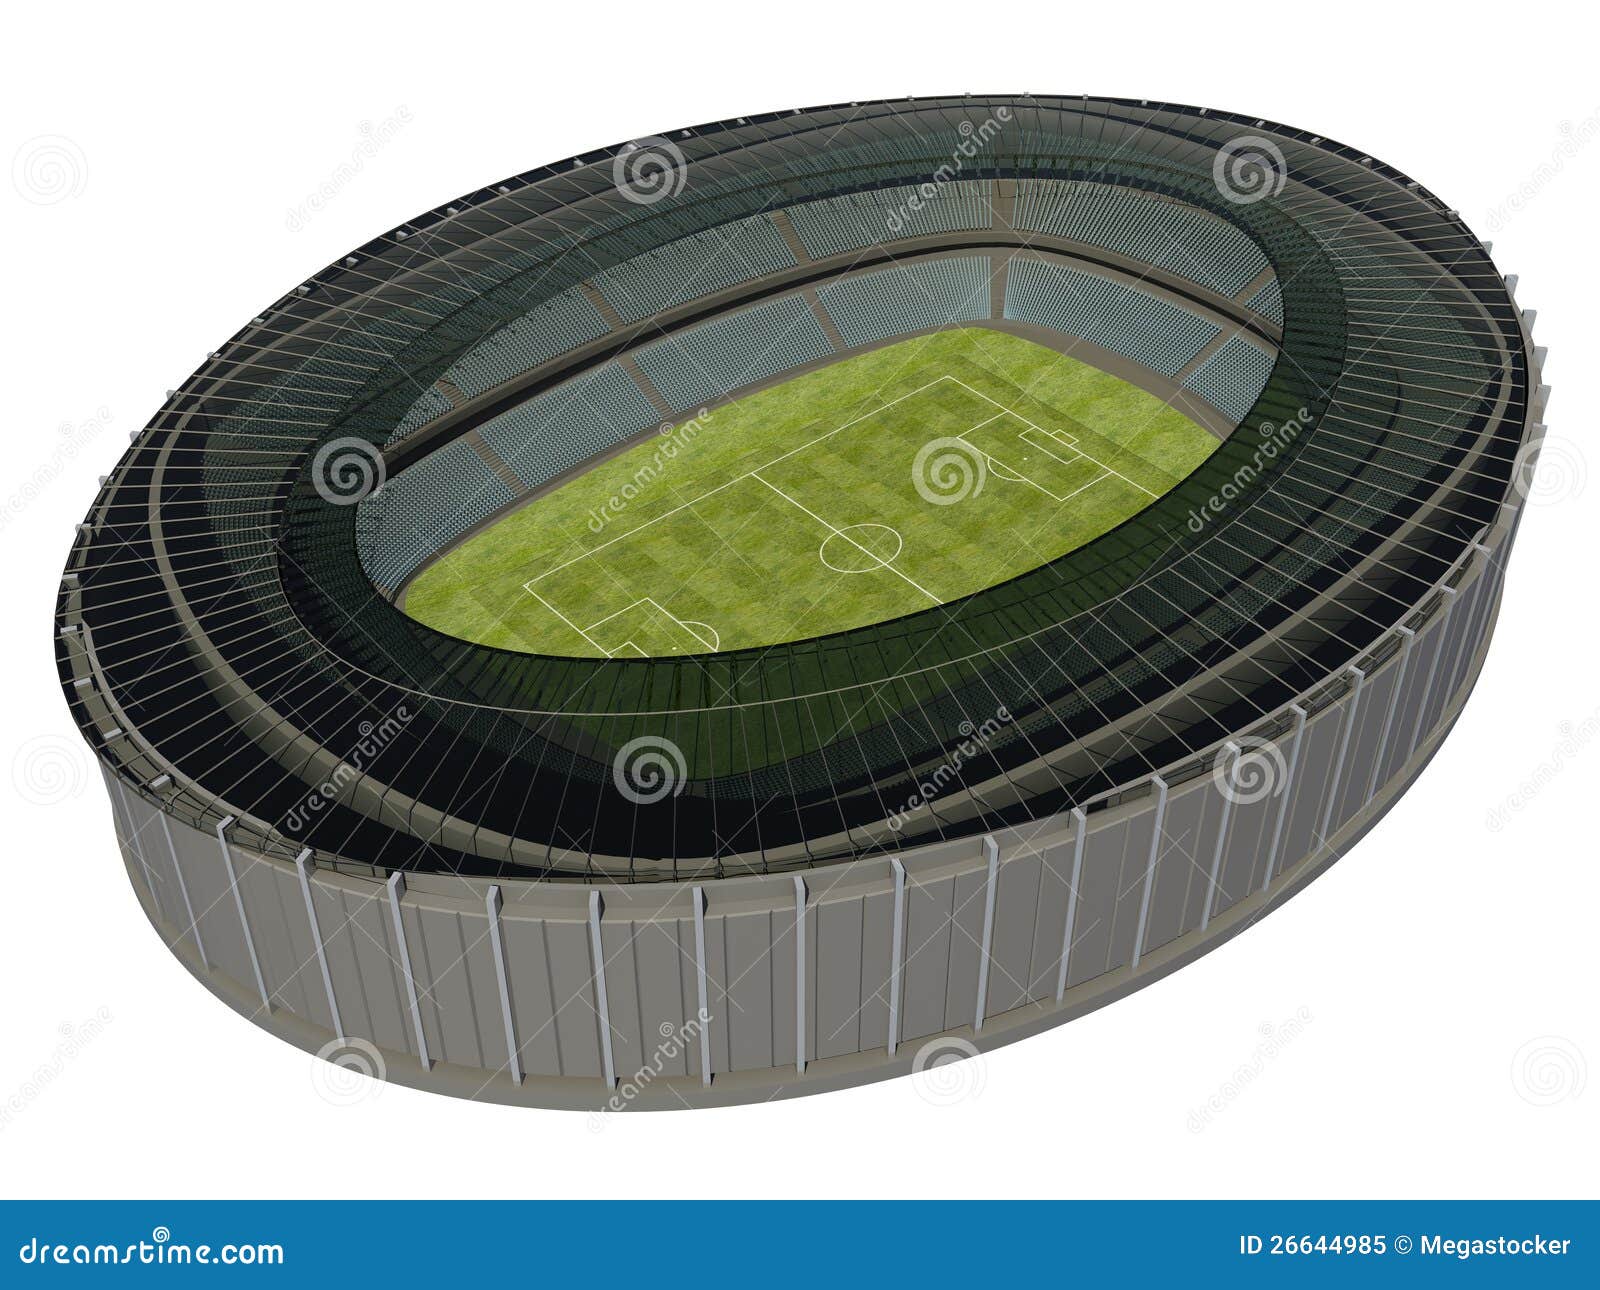 Olympic Stadium With Soccer Field Stock Illustration ...